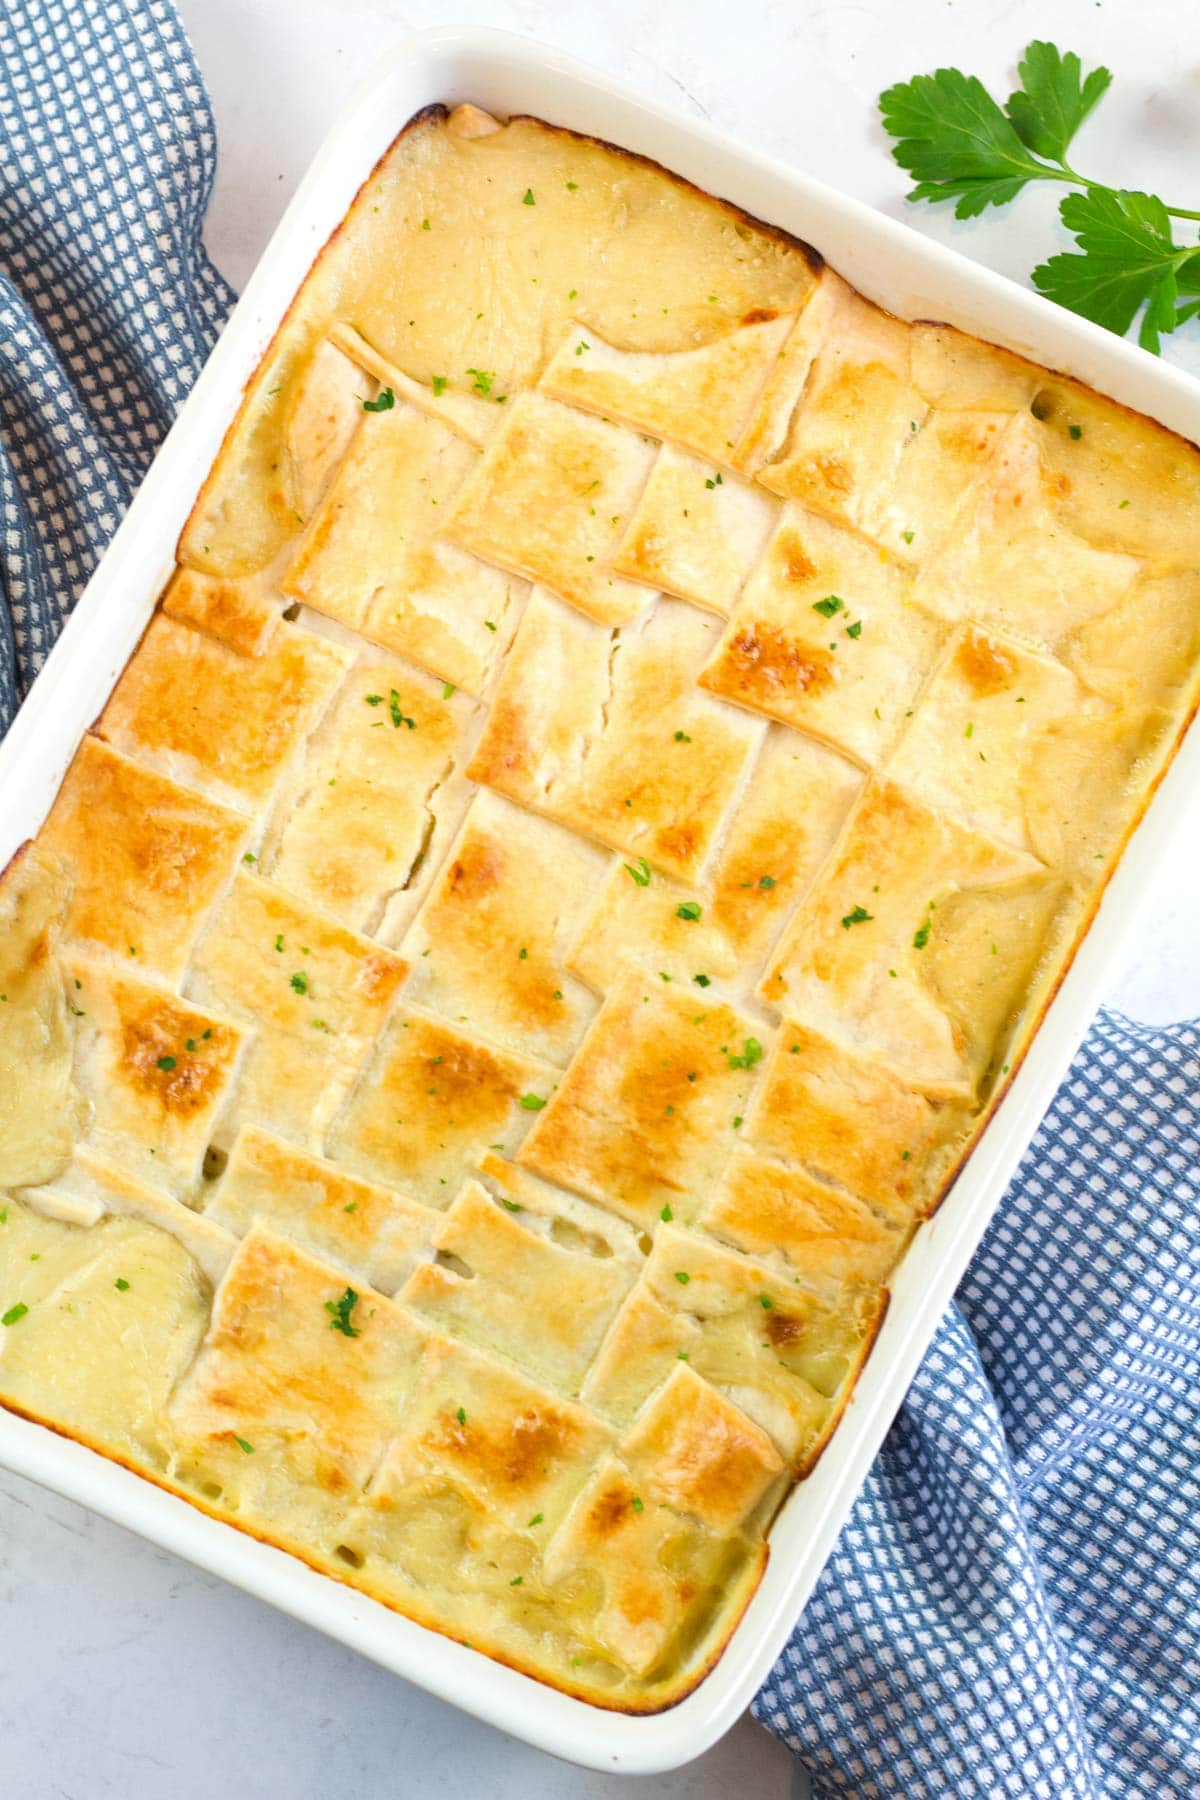 Square pieces of pie crust over pot pie filling made with rotisserie chicken baked to golden brown.